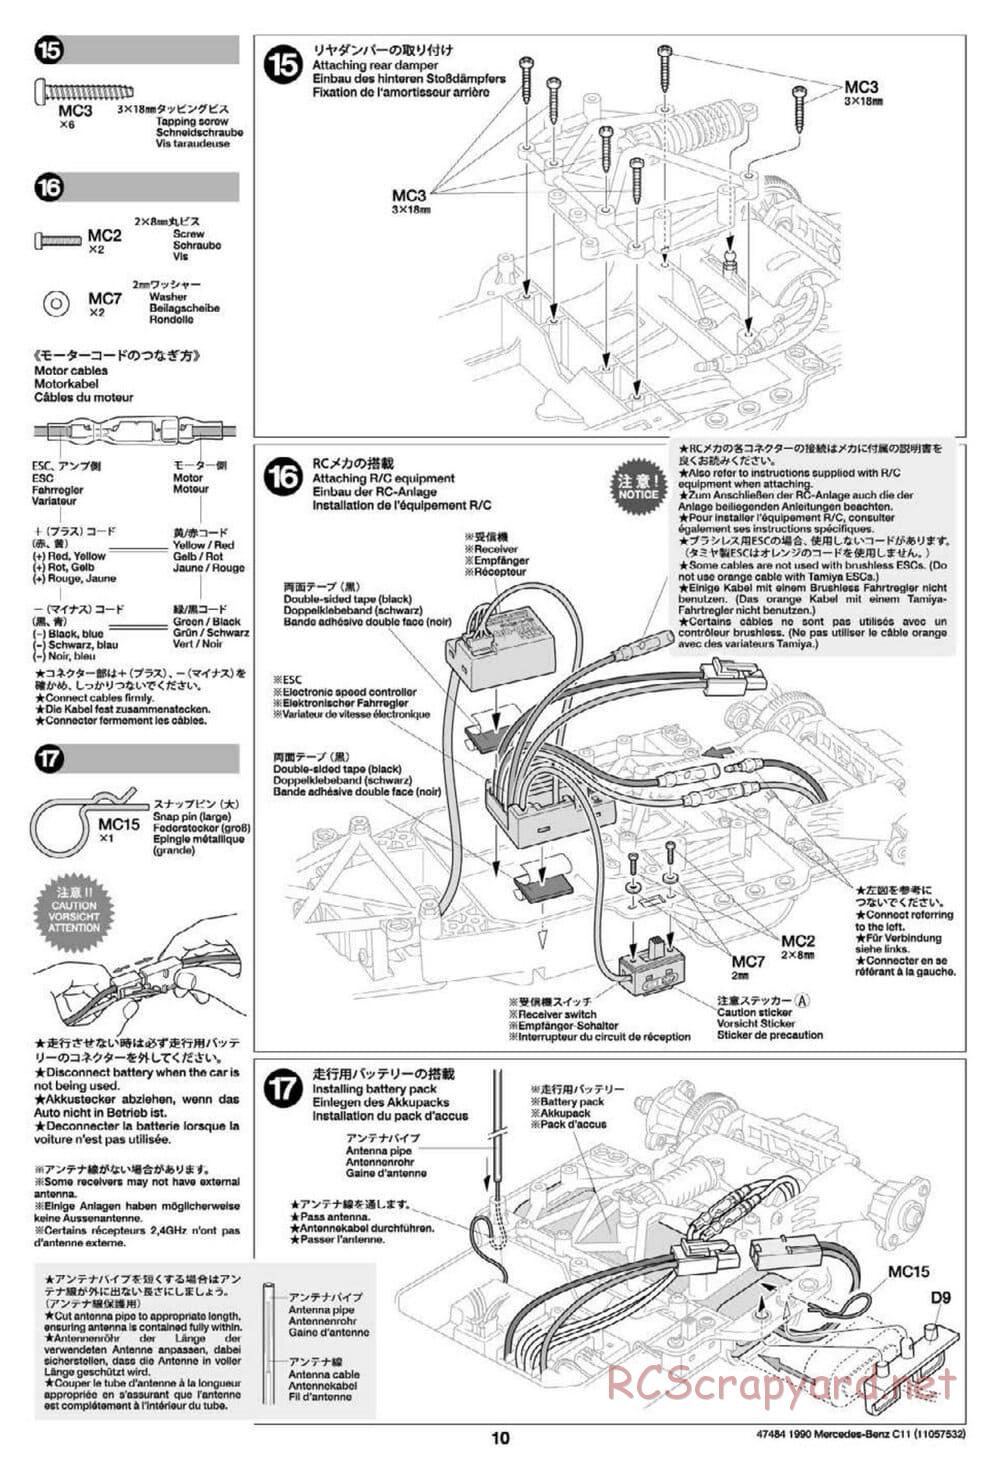 Tamiya - 1990 Mercedes-Benz C11 - Group-C Chassis - Manual - Page 10